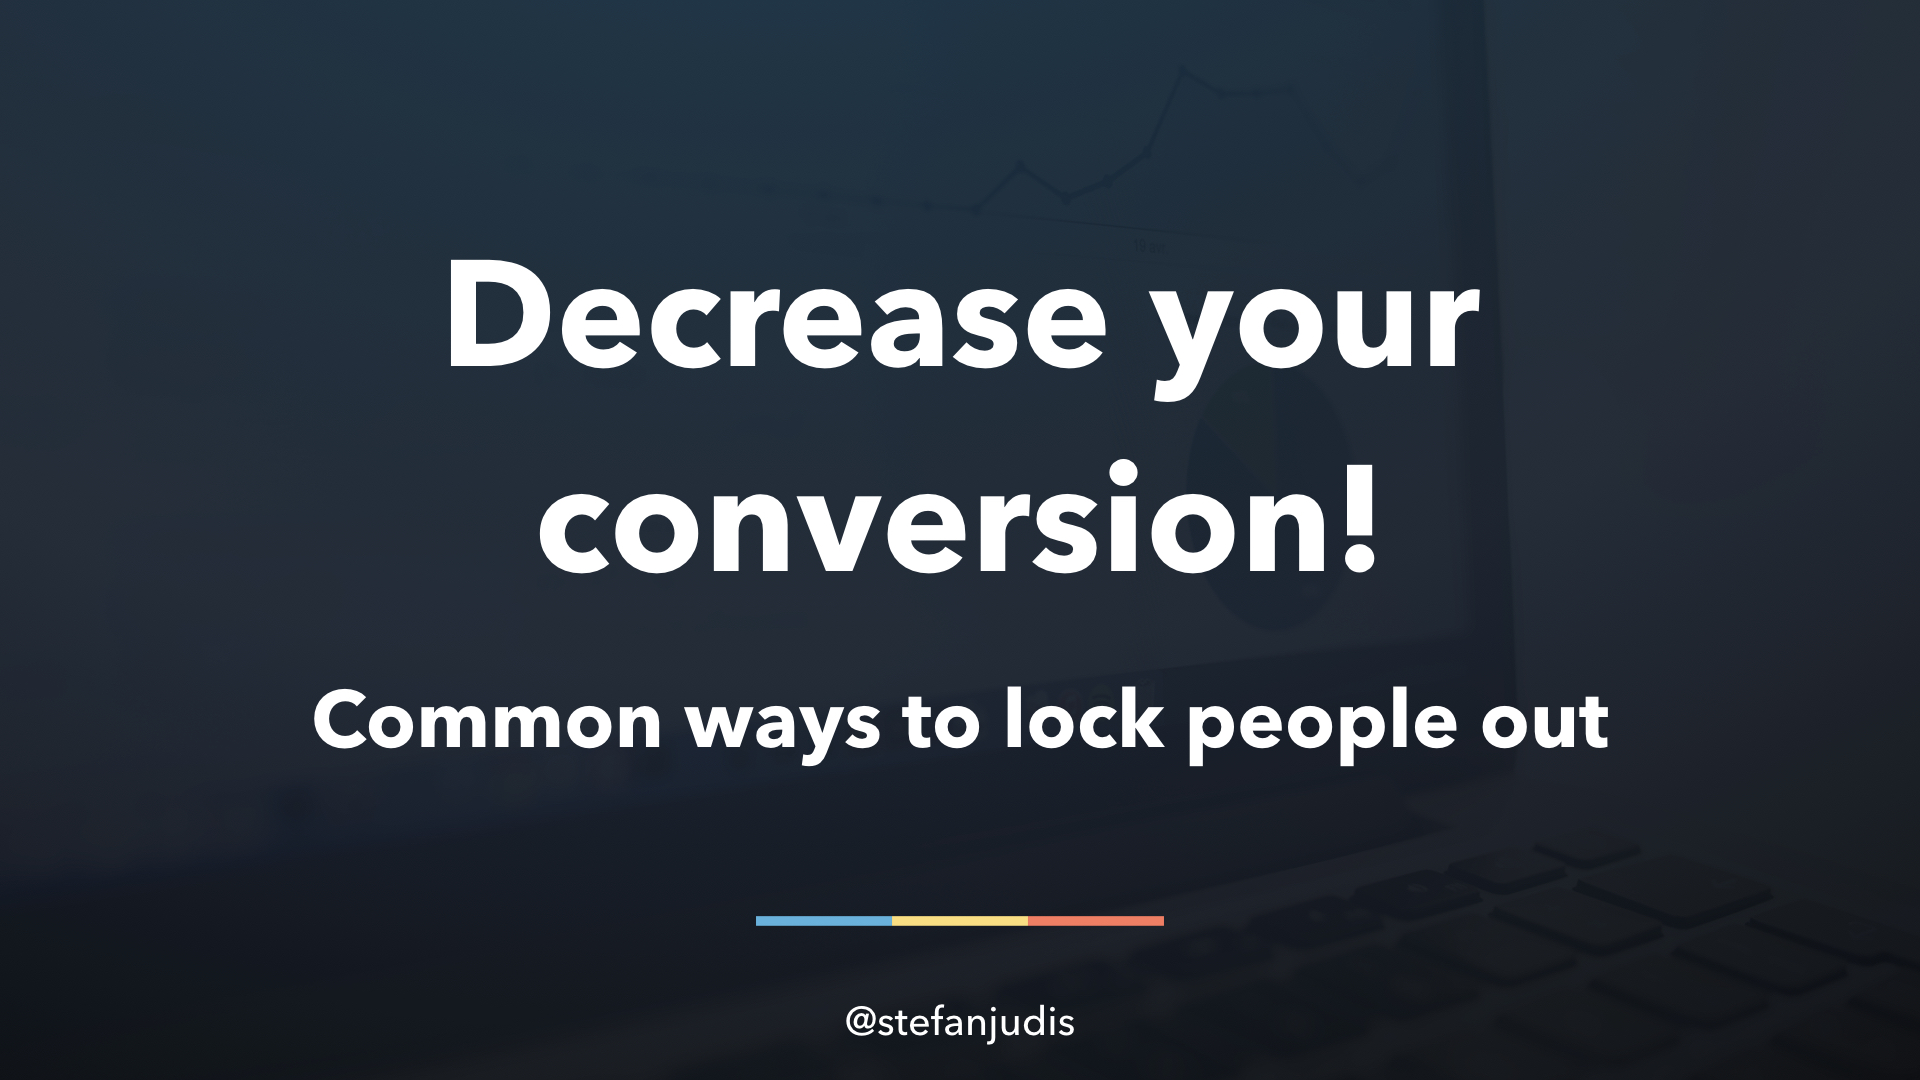 Decrease your conversion - common ways to lock people out